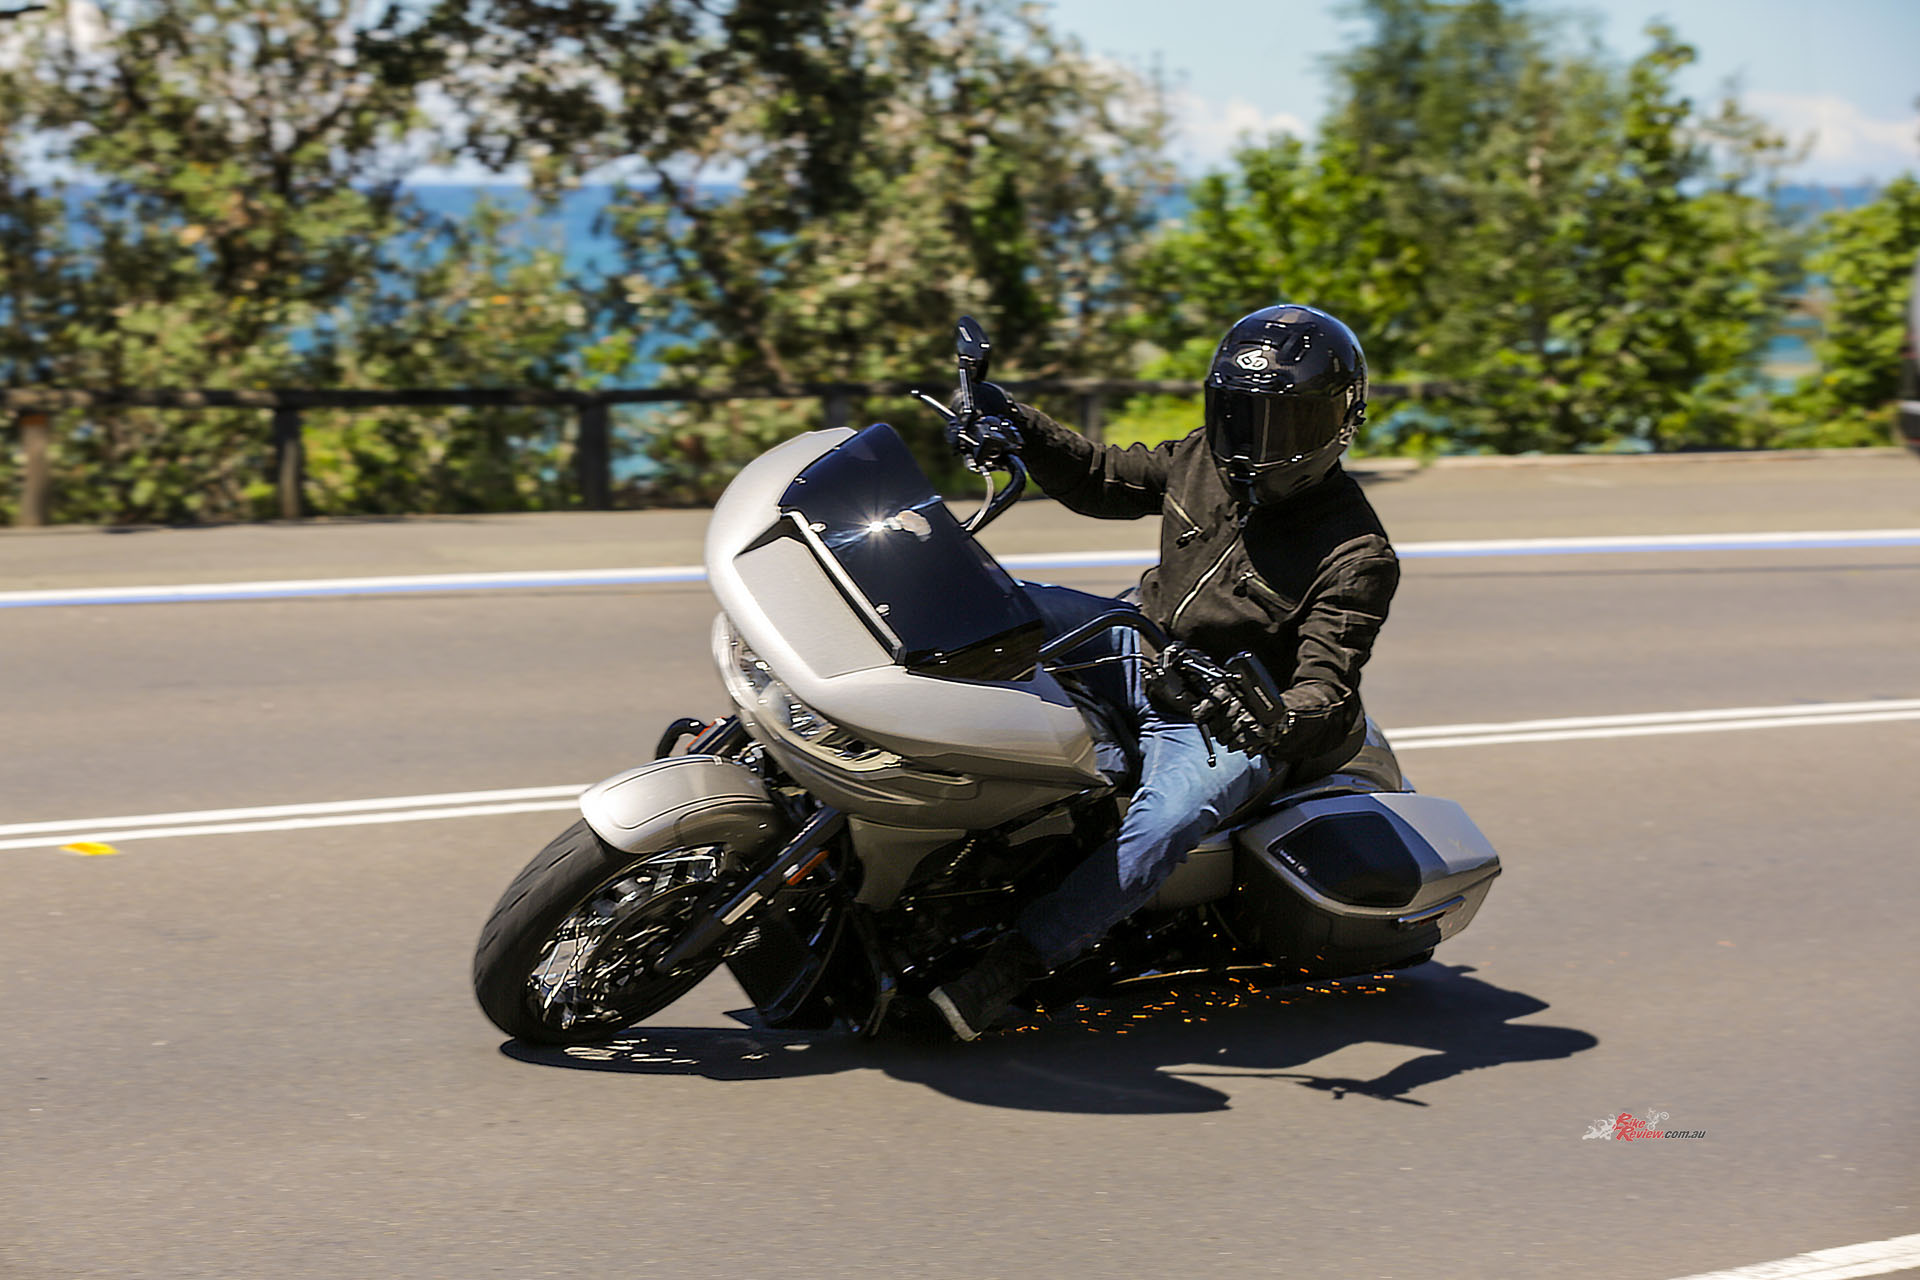 "Smashing the CVO through my local twisties, the bike just wants to sail from side to side and holds its line so accurately."